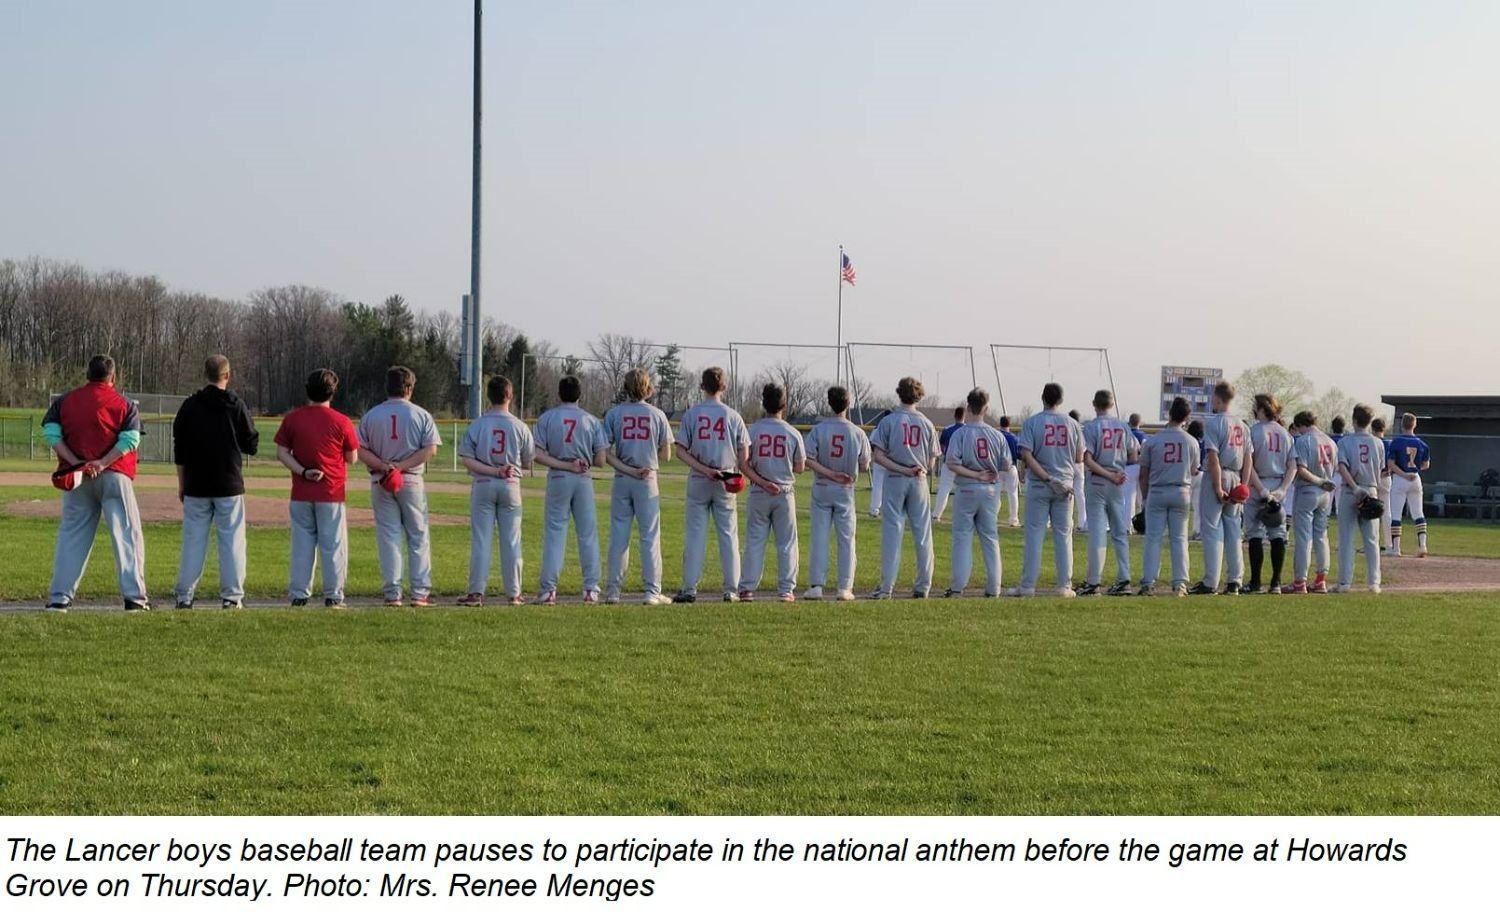 The Lancer boys baseball team pauses for the National Anthem at the start of the game Thursday at Howards Grove.